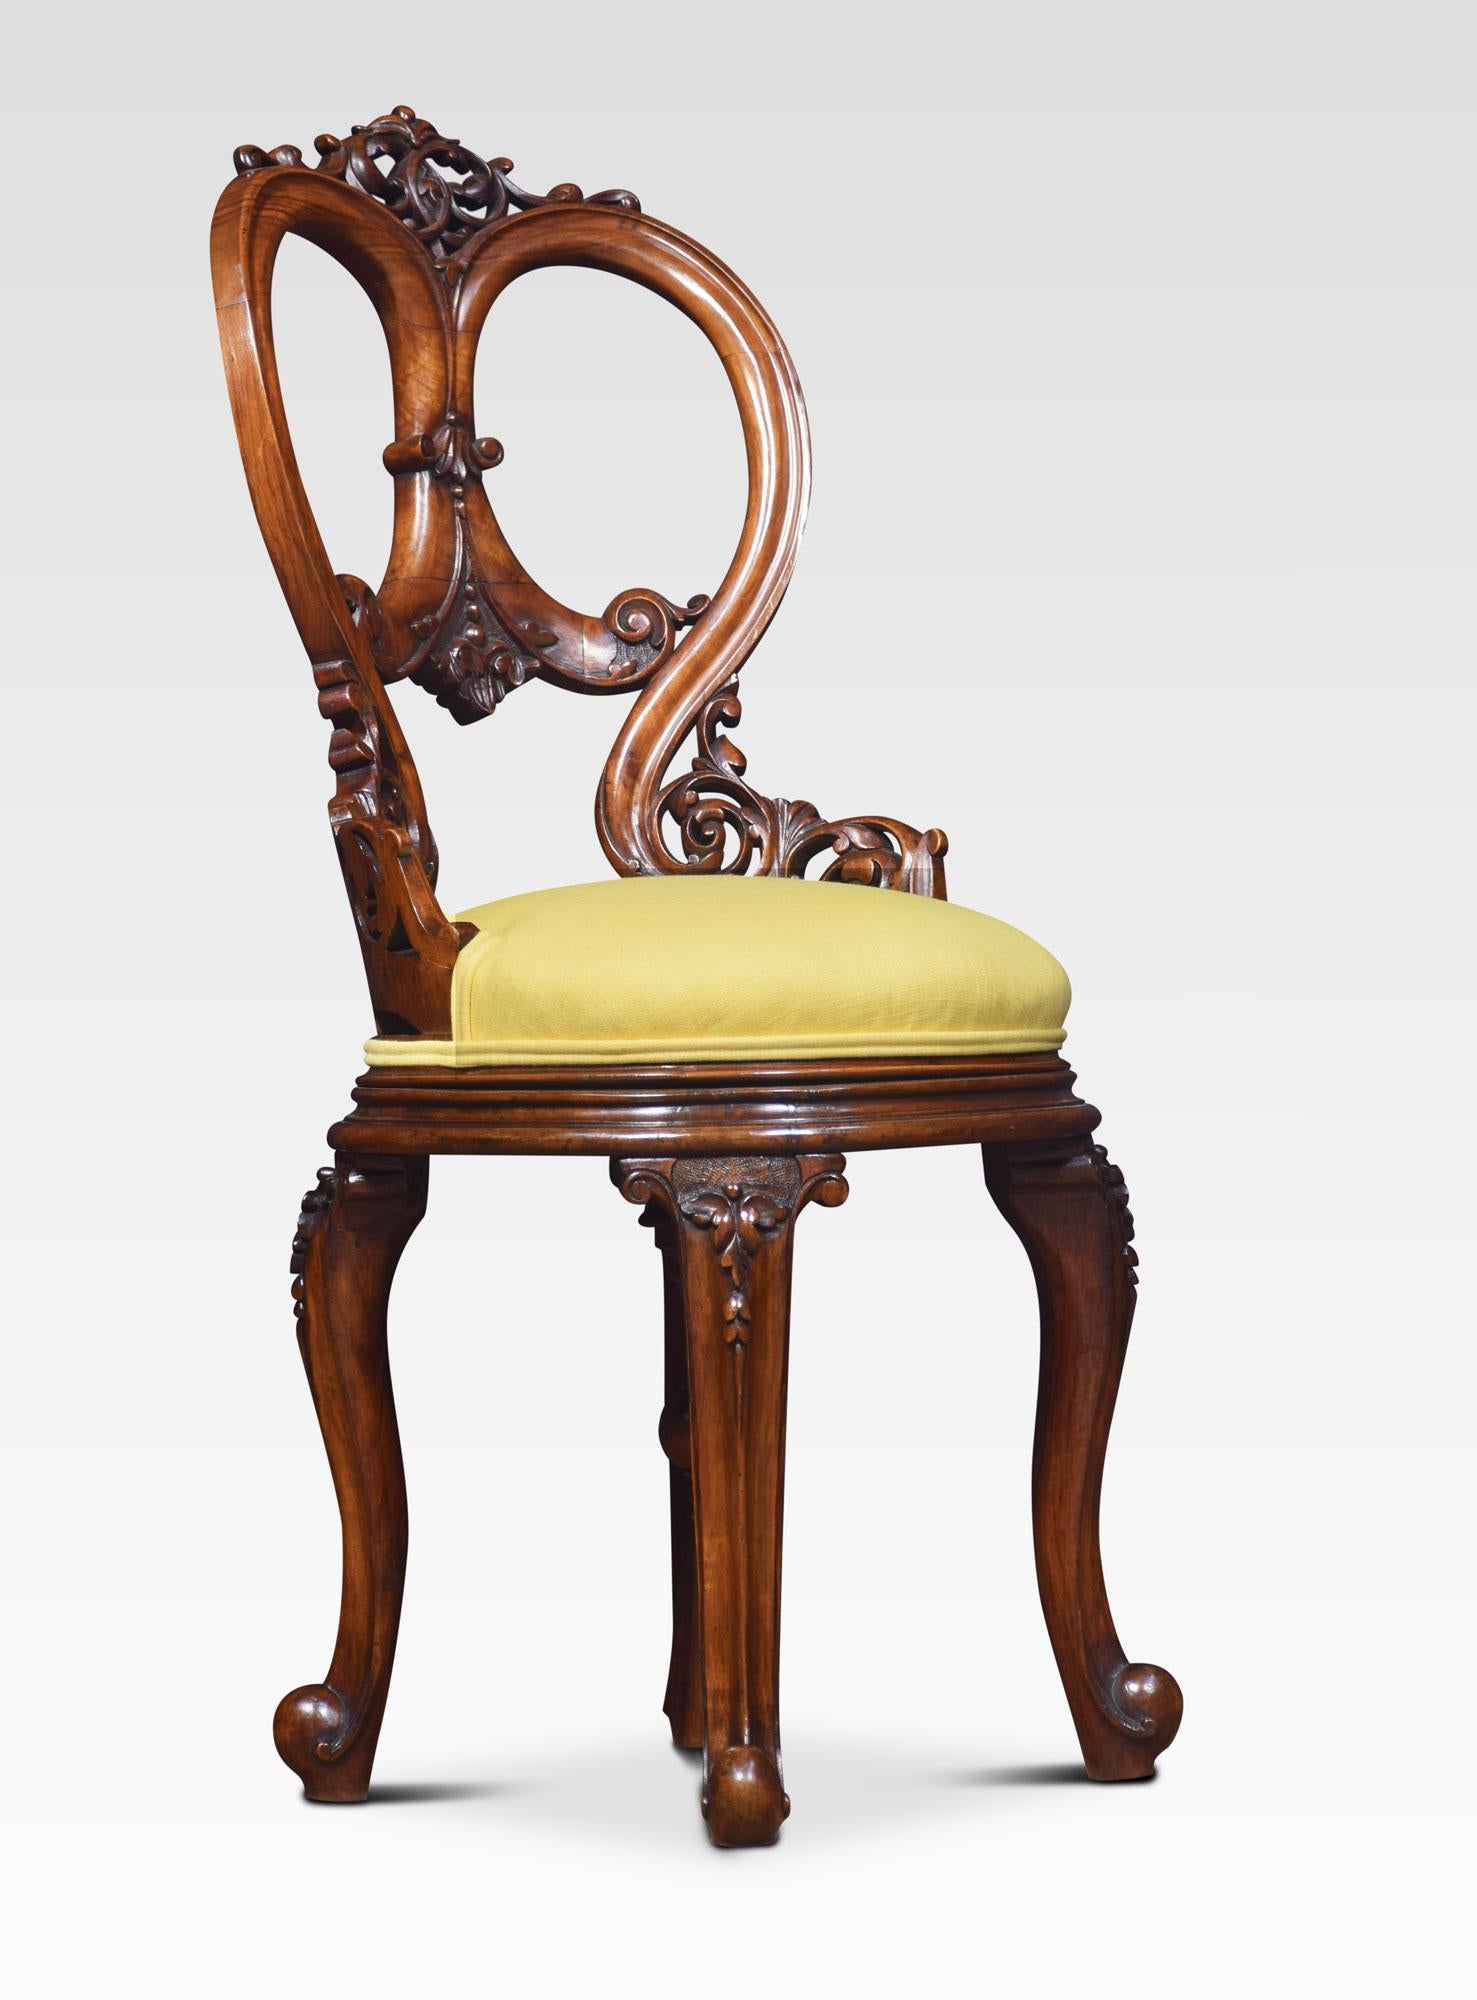 19th century adjustable walnut music chair having balloon carved back above a circular upholstered seat, with swivel height adjustable mechanism. All raised up on four cabriole legs terminating is scrolling toes
Dimensions:
Height 37.5 inches